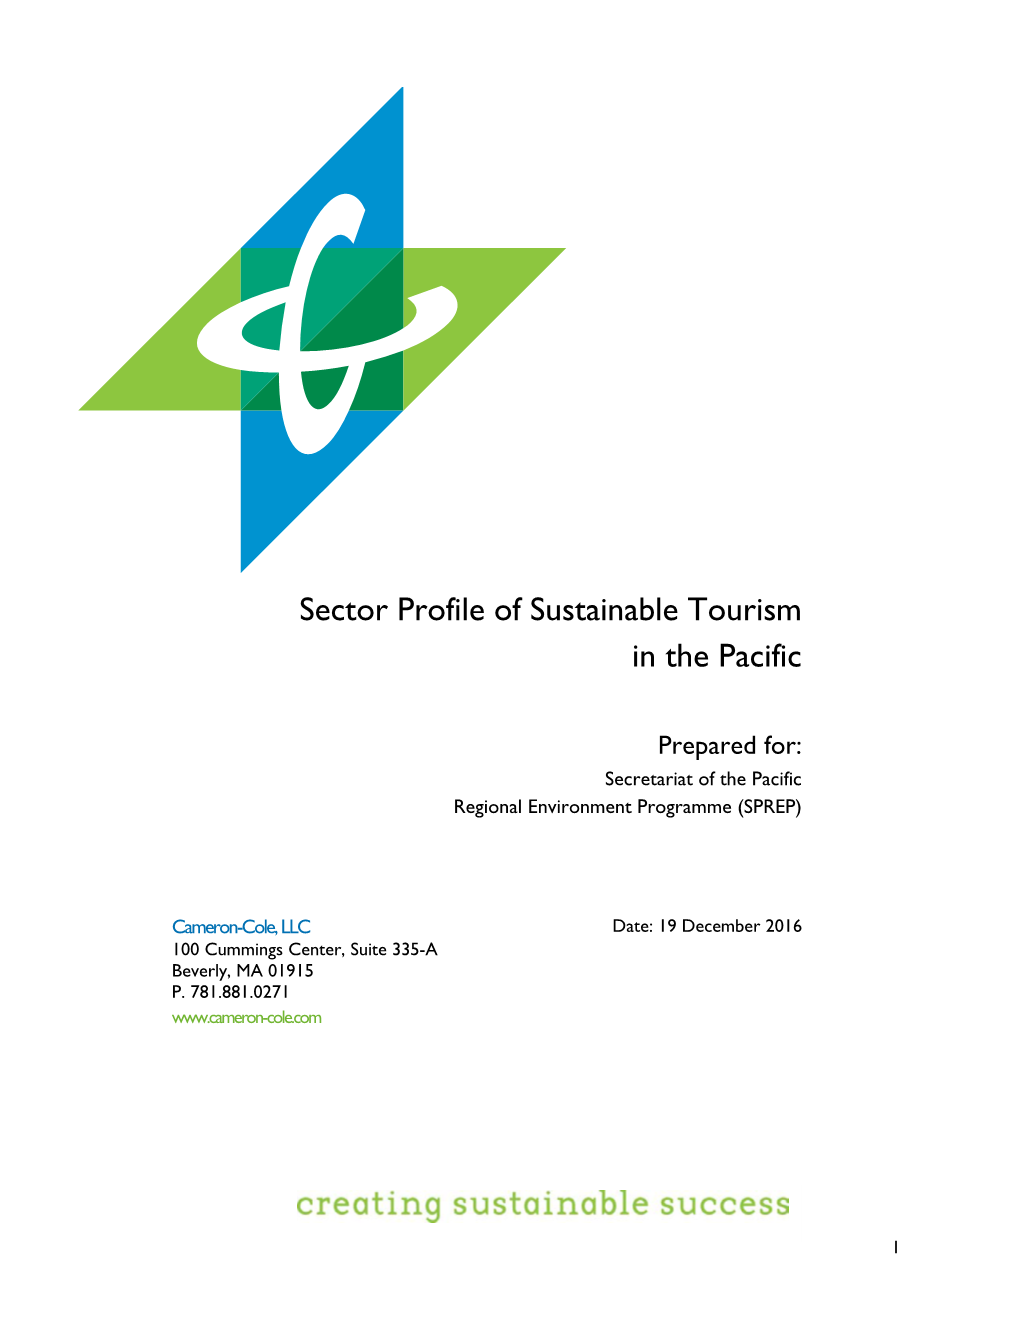 Sector Profile of Sustainable Tourism in the Pacific